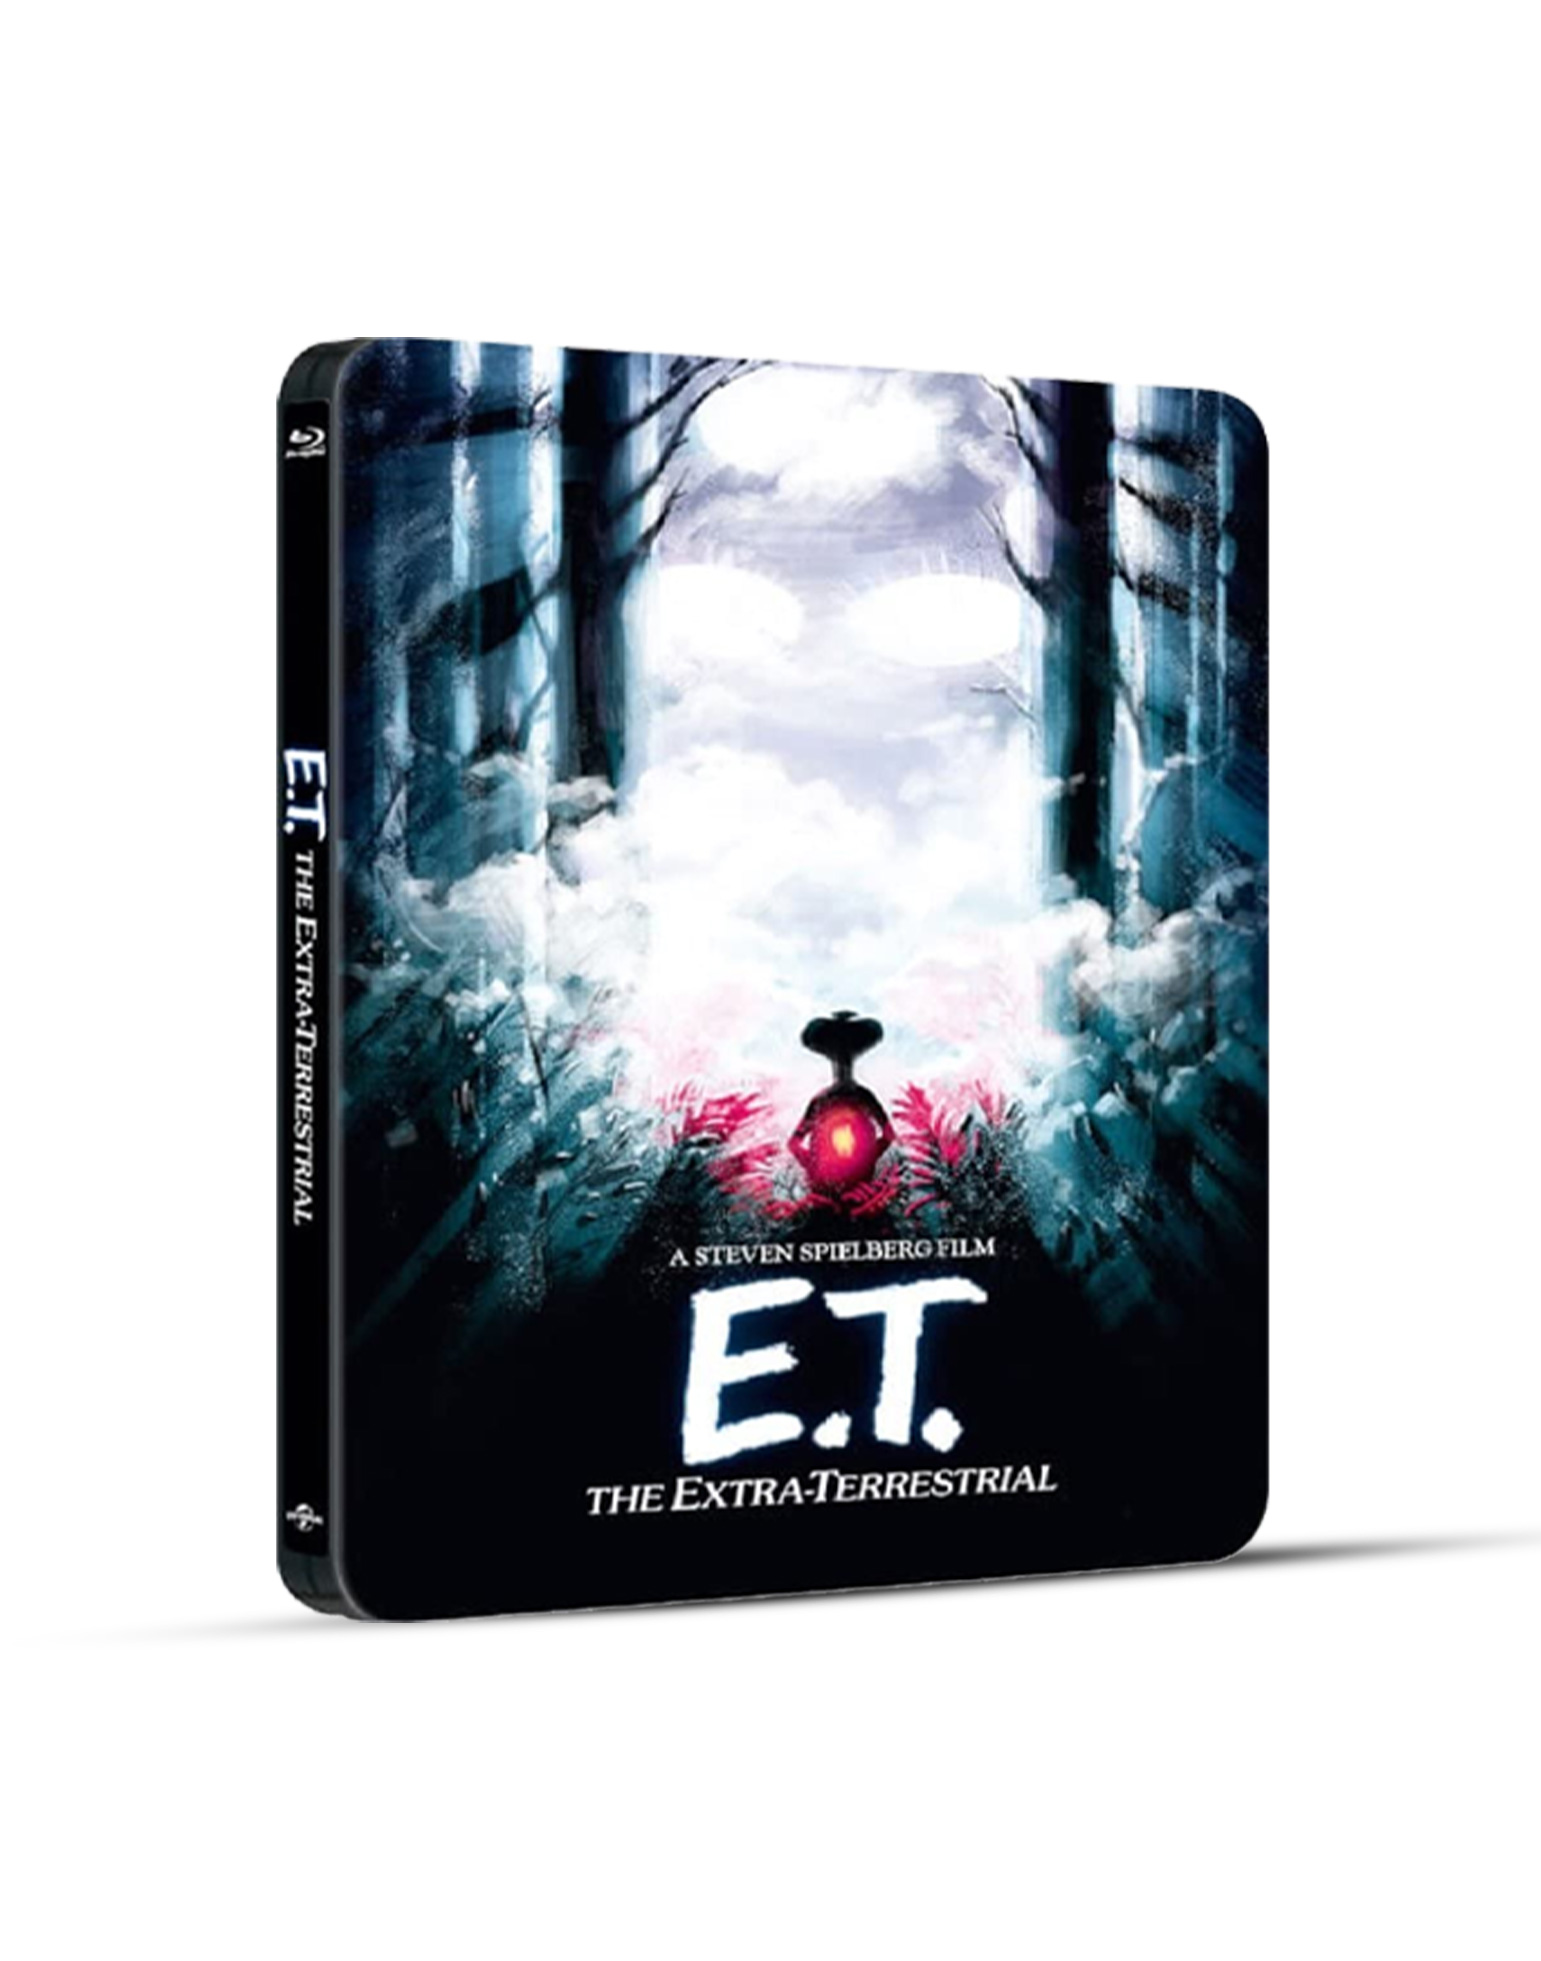 E.T. The Extra Terrestrial (Steelbook) - Blu-ray [ 1982 ]  - Sci Fi Movies On Blu-ray - Movies On GRUV